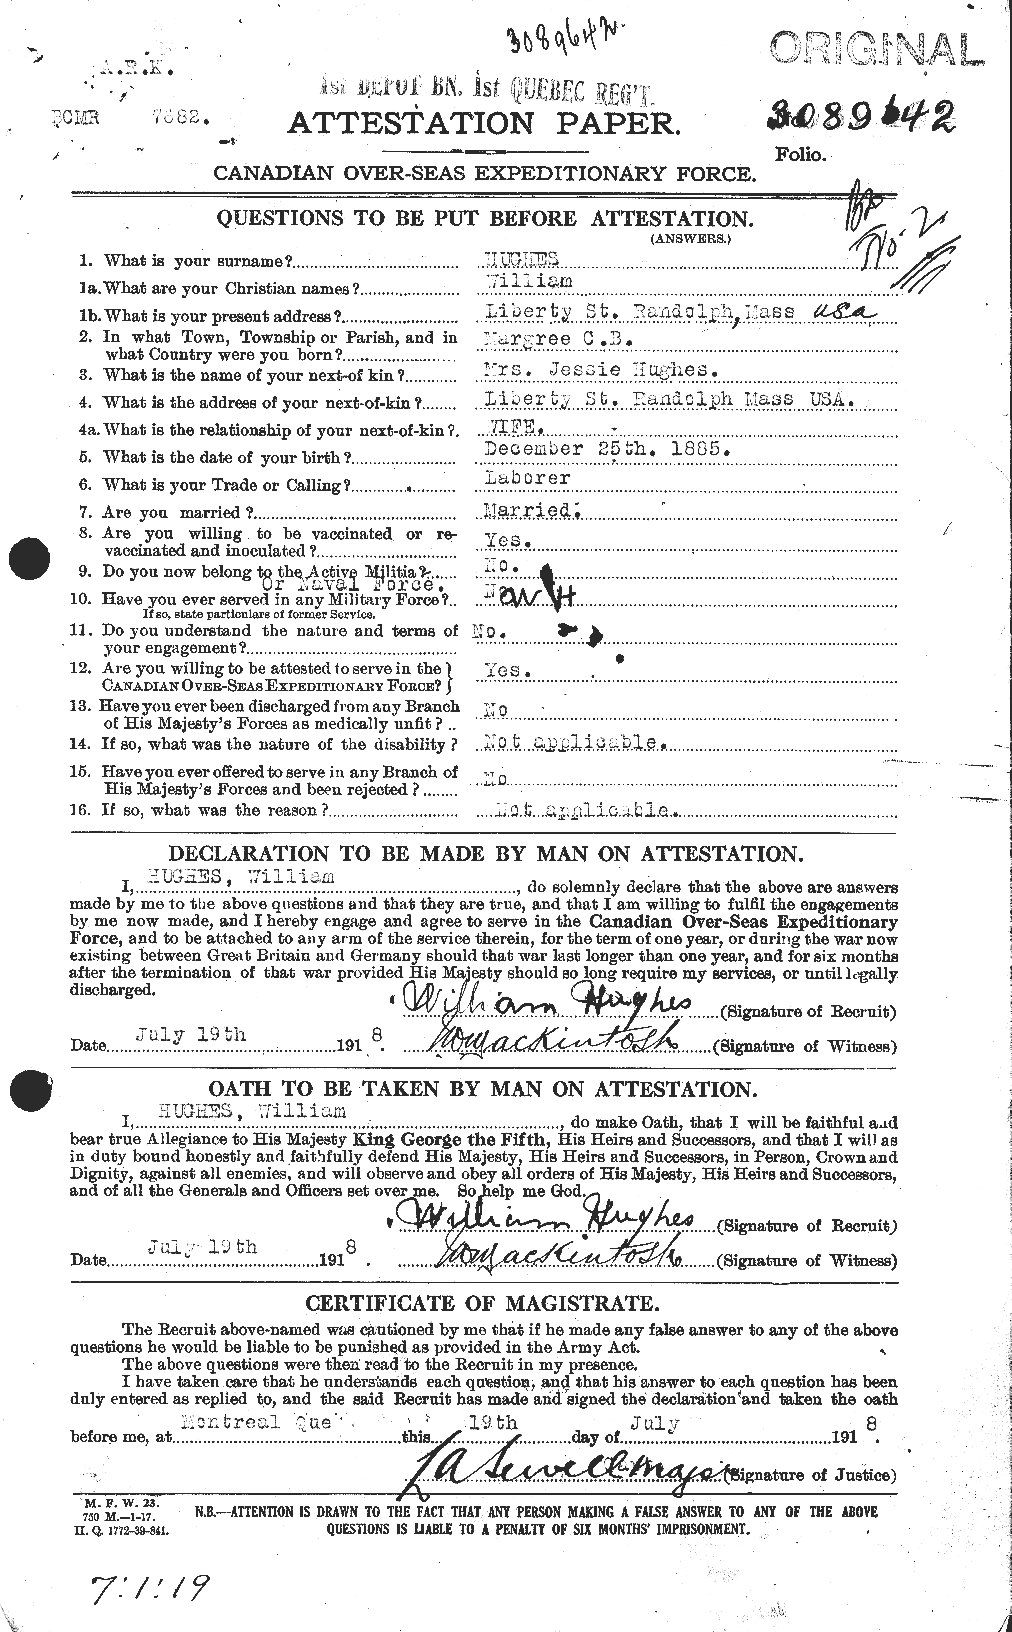 Personnel Records of the First World War - CEF 405880a